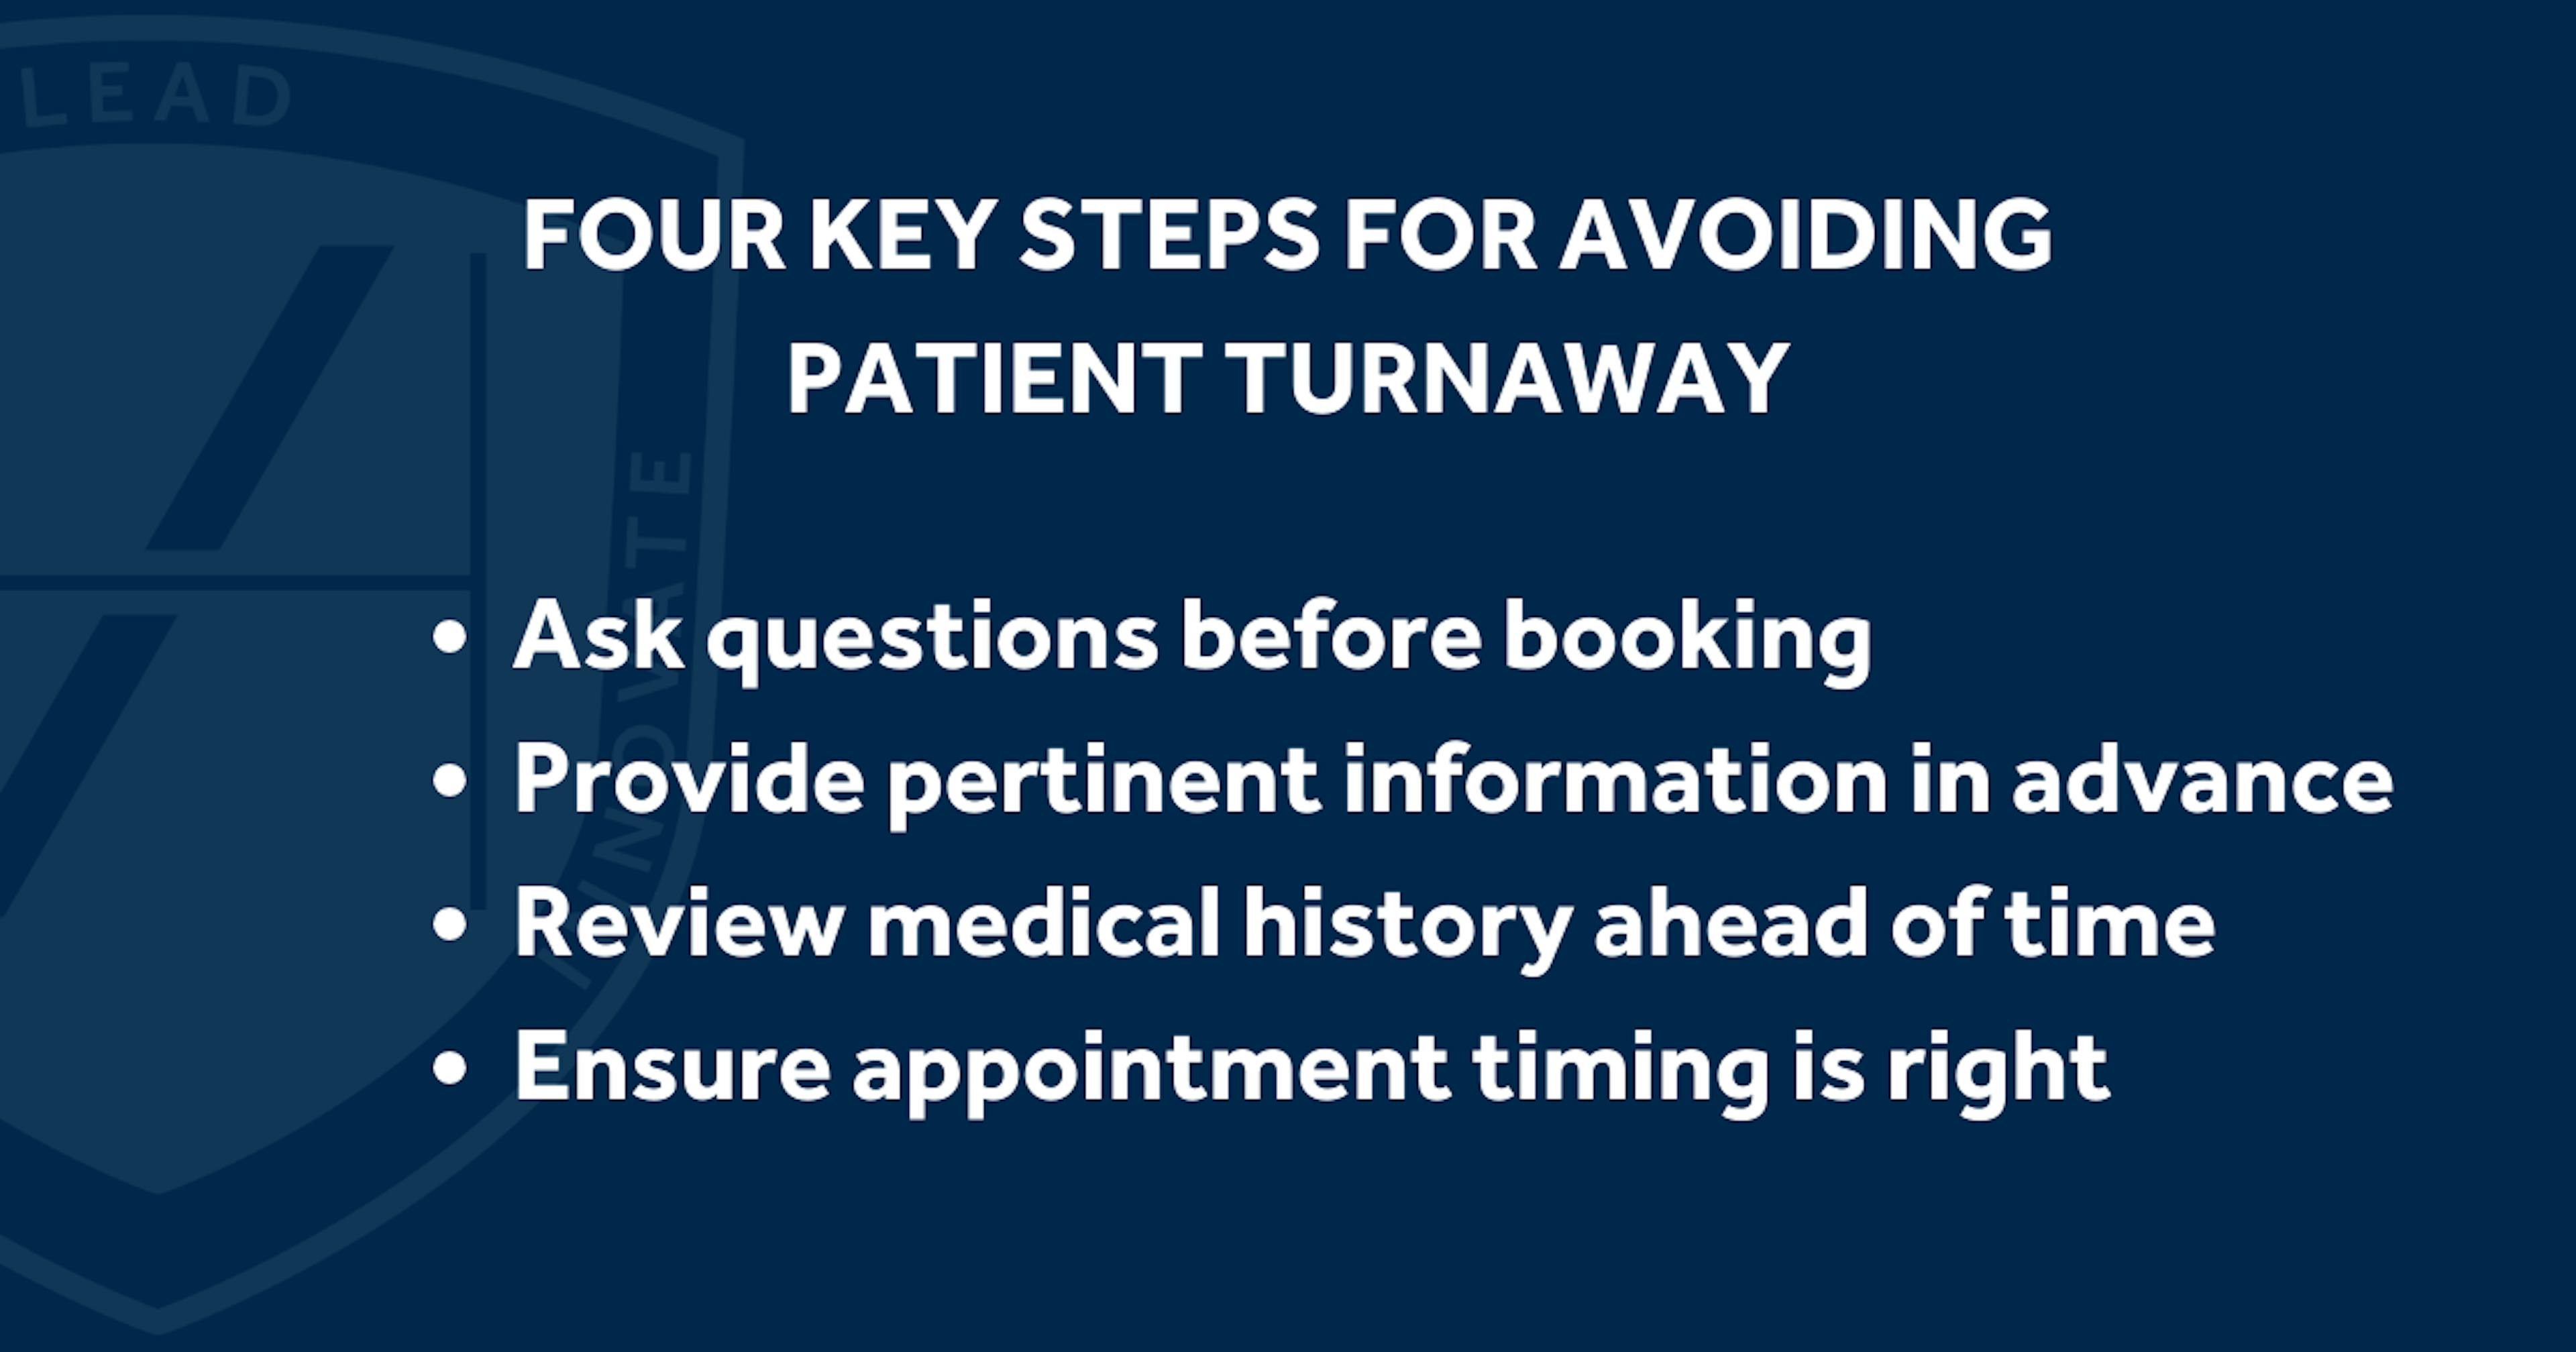 Harley Academy medical aesthetics training courses four steps for avoiding patient turn away